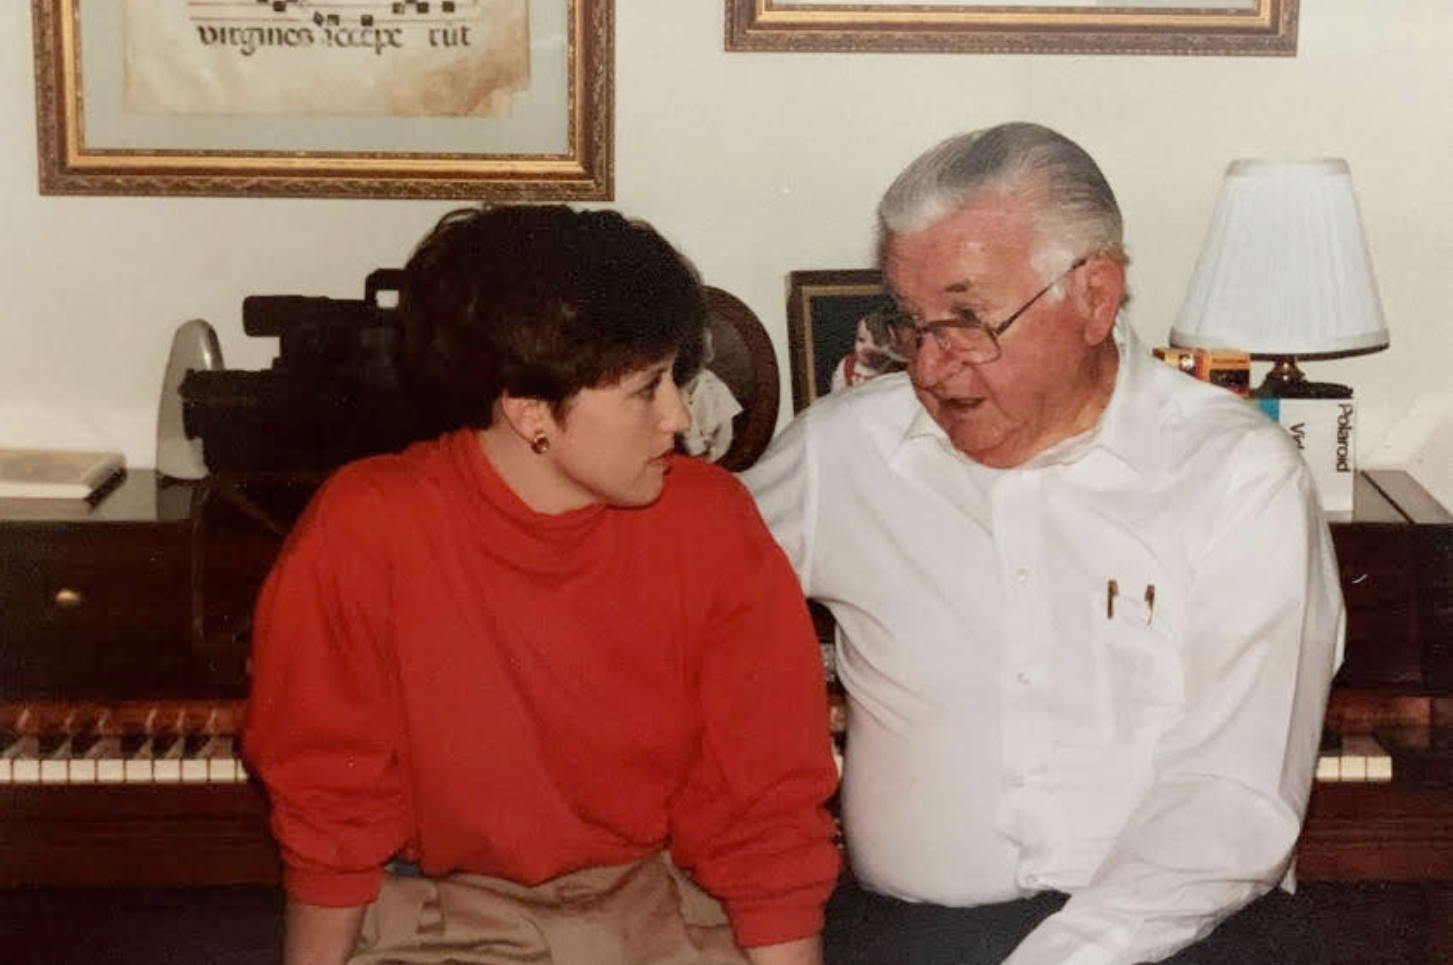 An older man and a younger woman sit together in front of a piano, engaged in conversation. The man wears a white shirt and glasses, while the woman is dressed in a red sweater. Framed pictures and a lamp on a table are visible in the background.